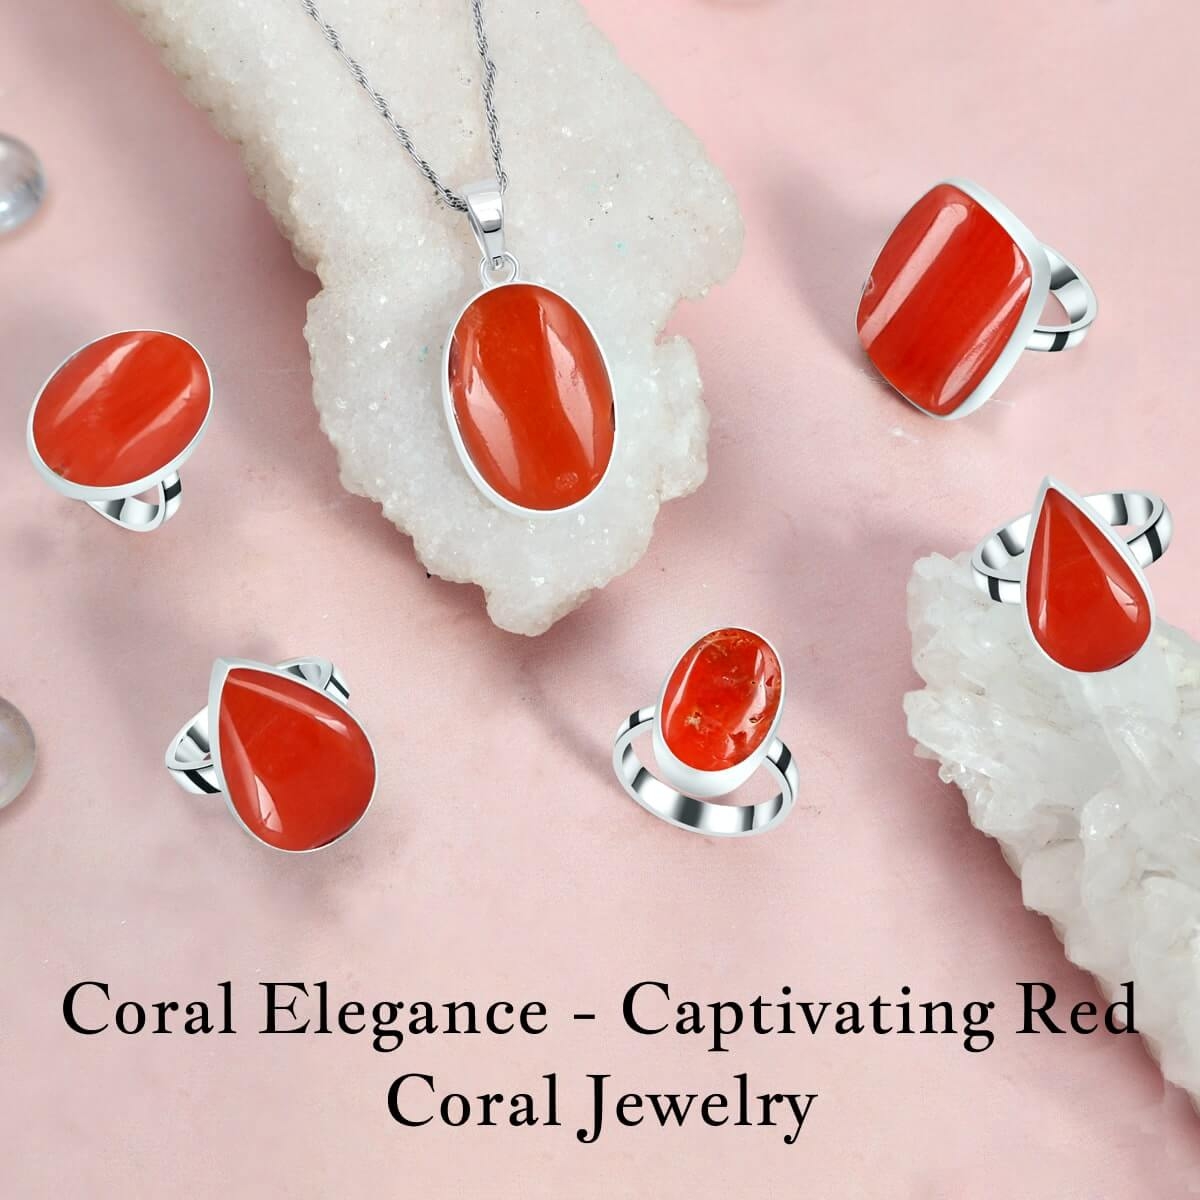 Divine Harmony: Red Coral Jewelry for Balance and Well-Being